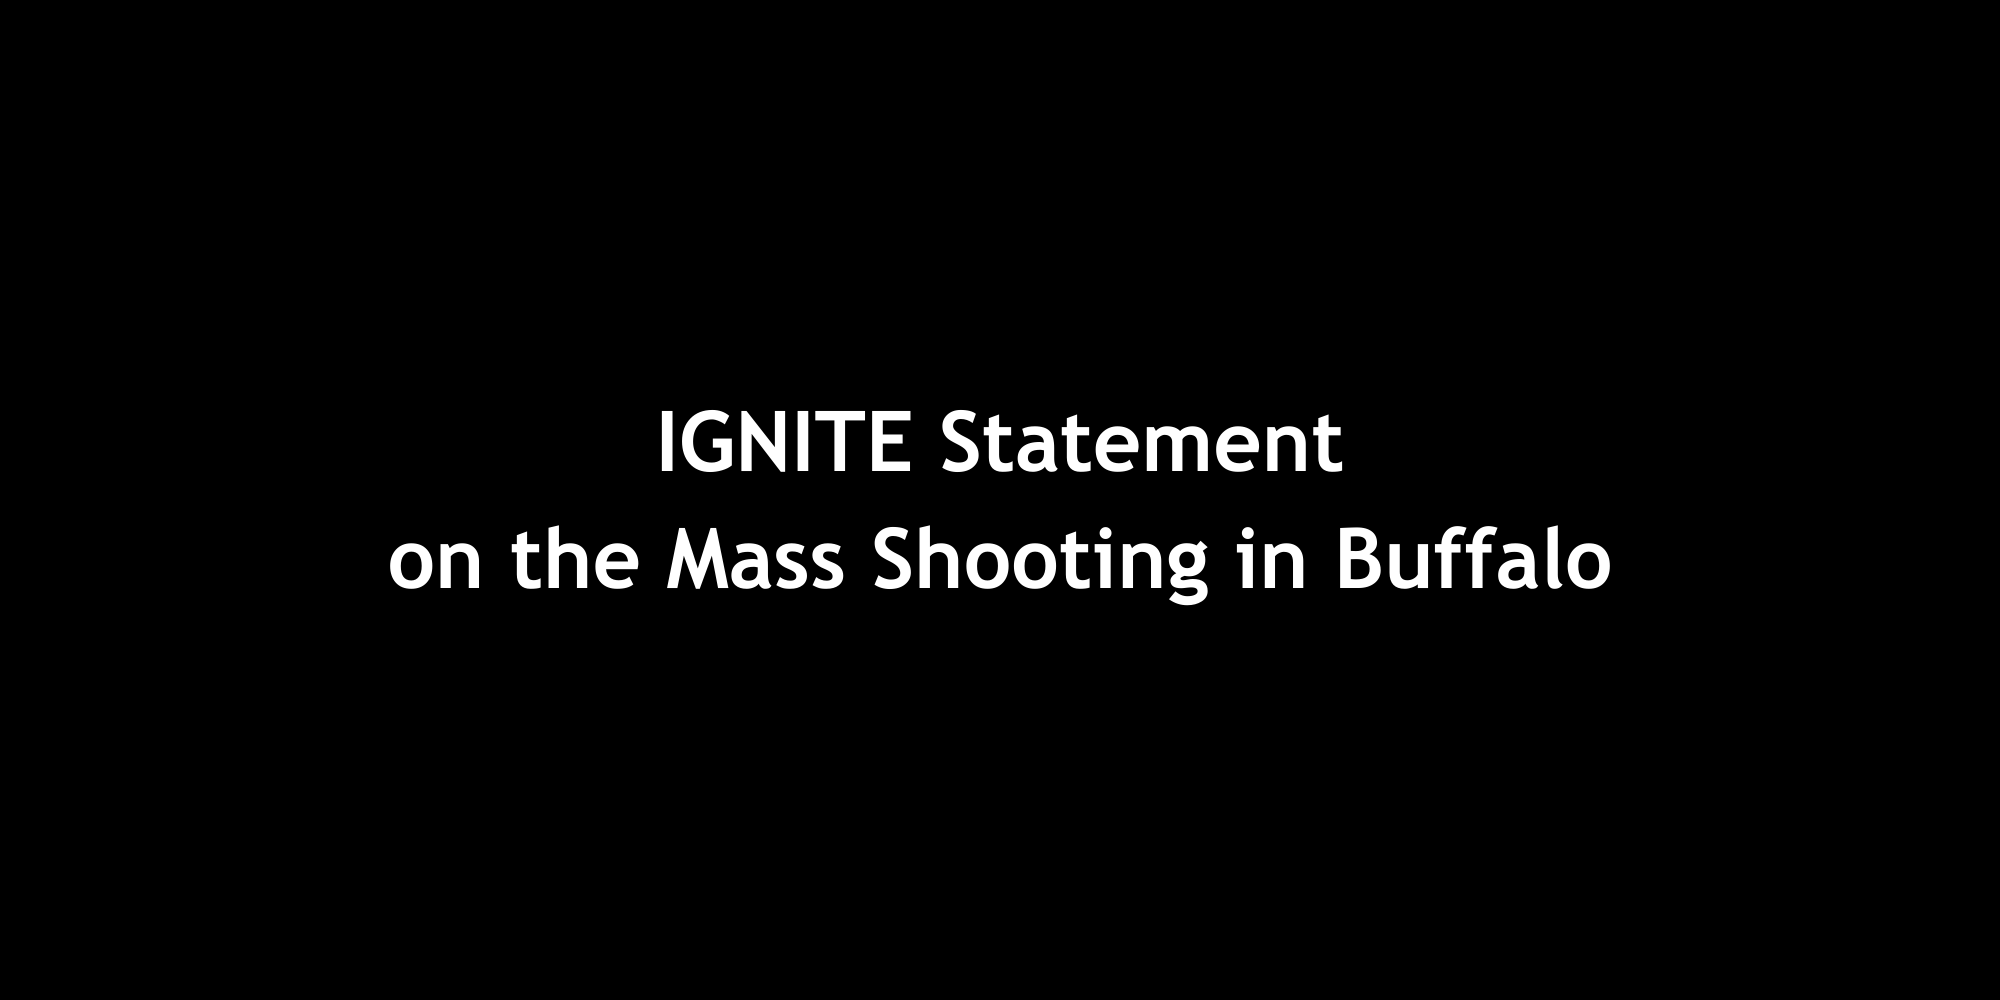 IGNITE Statement on the Mass Shooting in Buffalo